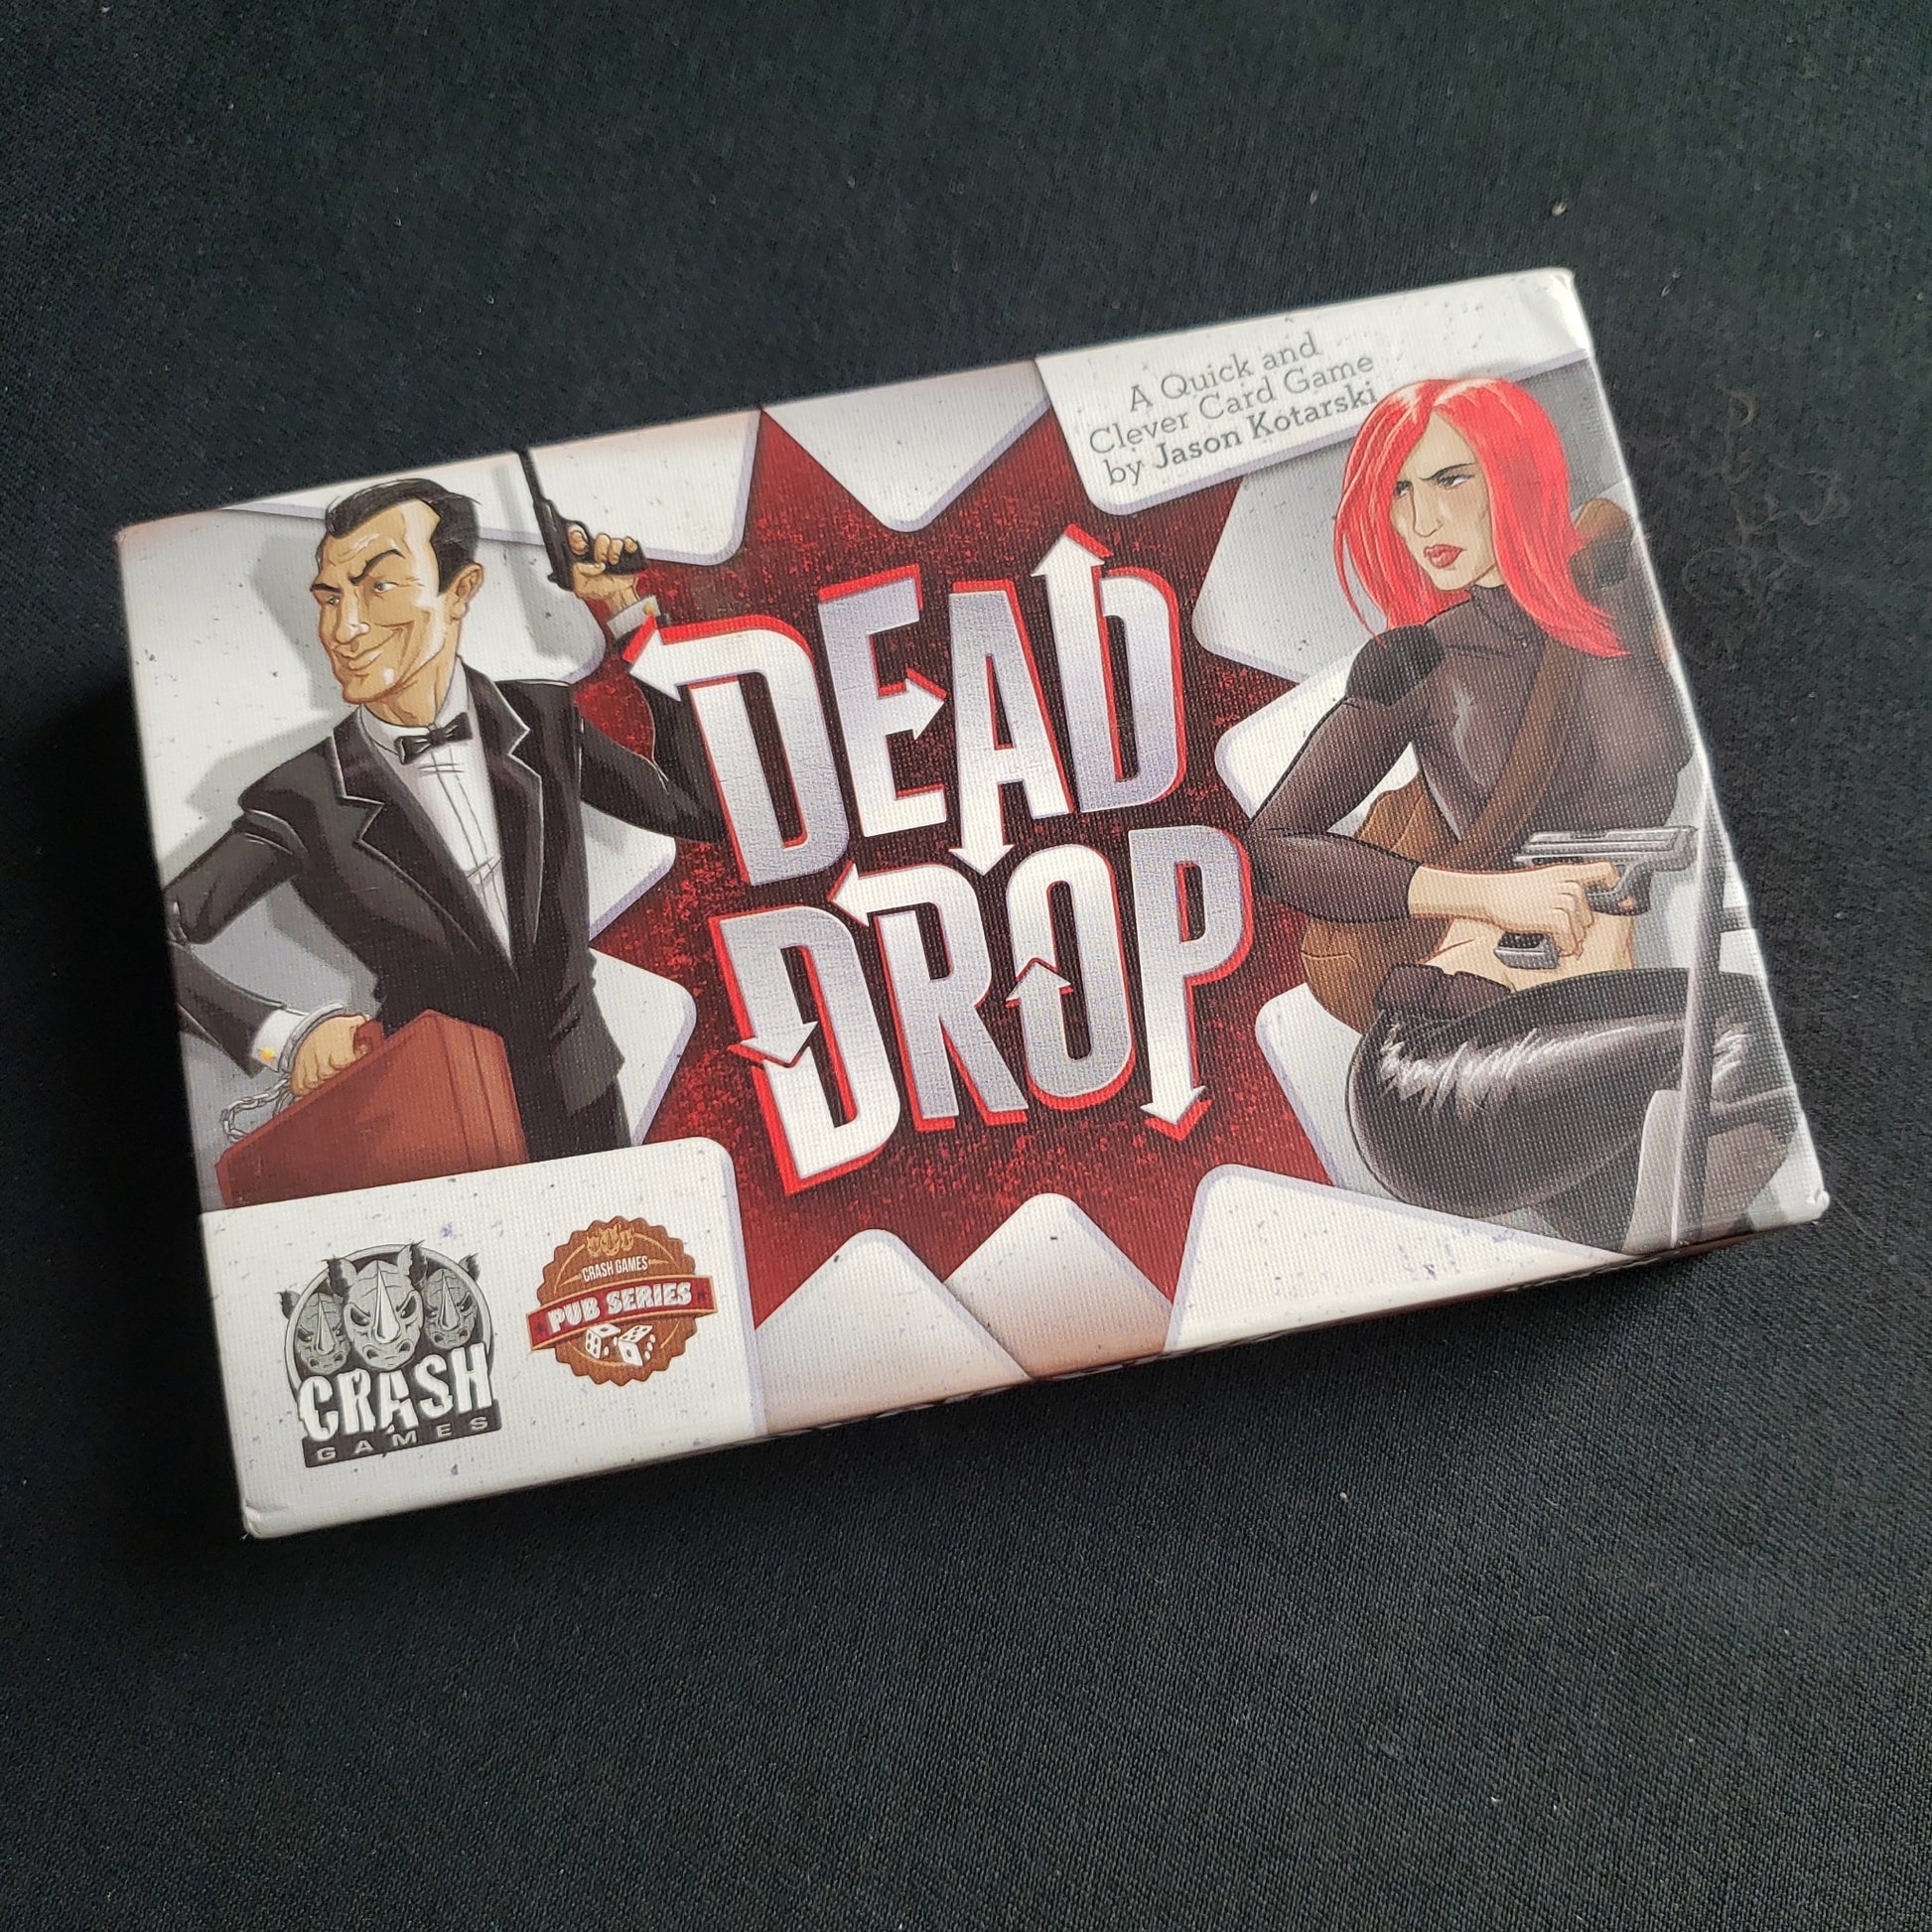 Image shows the front cover of the box of the Dead Drop card game